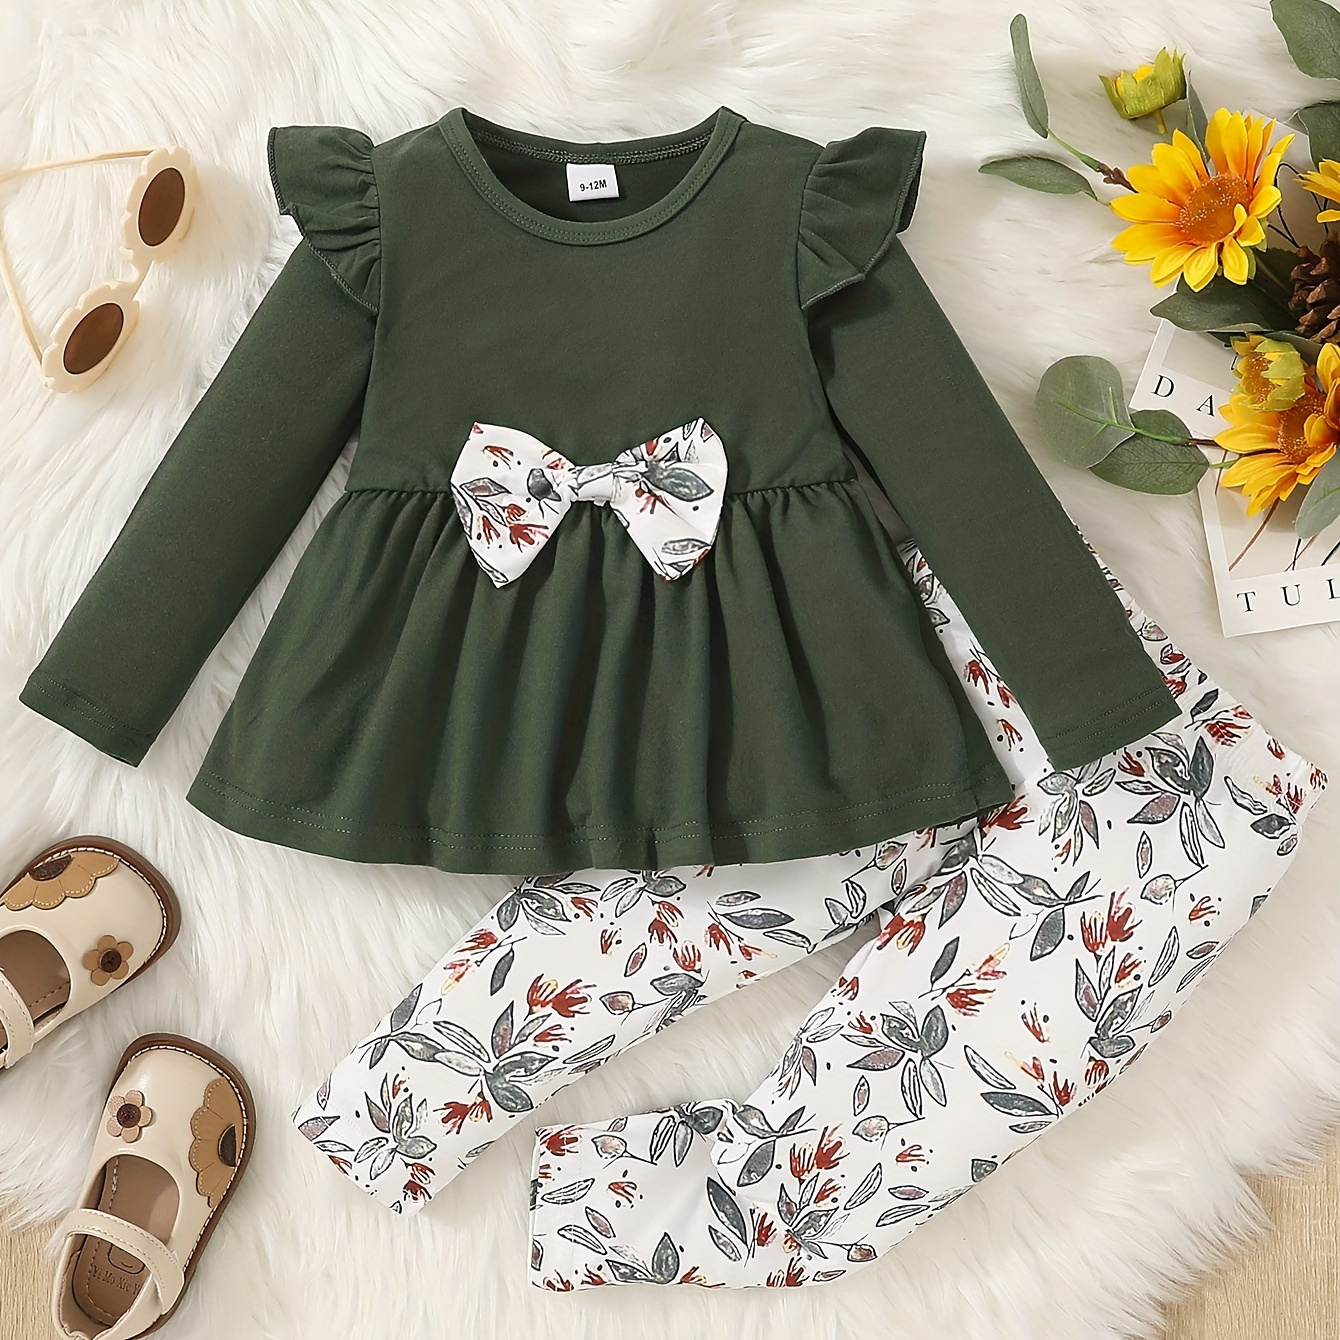 

Baby Girl Baby Autumn Winter Outwear Outfit, Flutter Sleeve Splicing Bowknot Skirt Top & Leaf Print Pants Set,